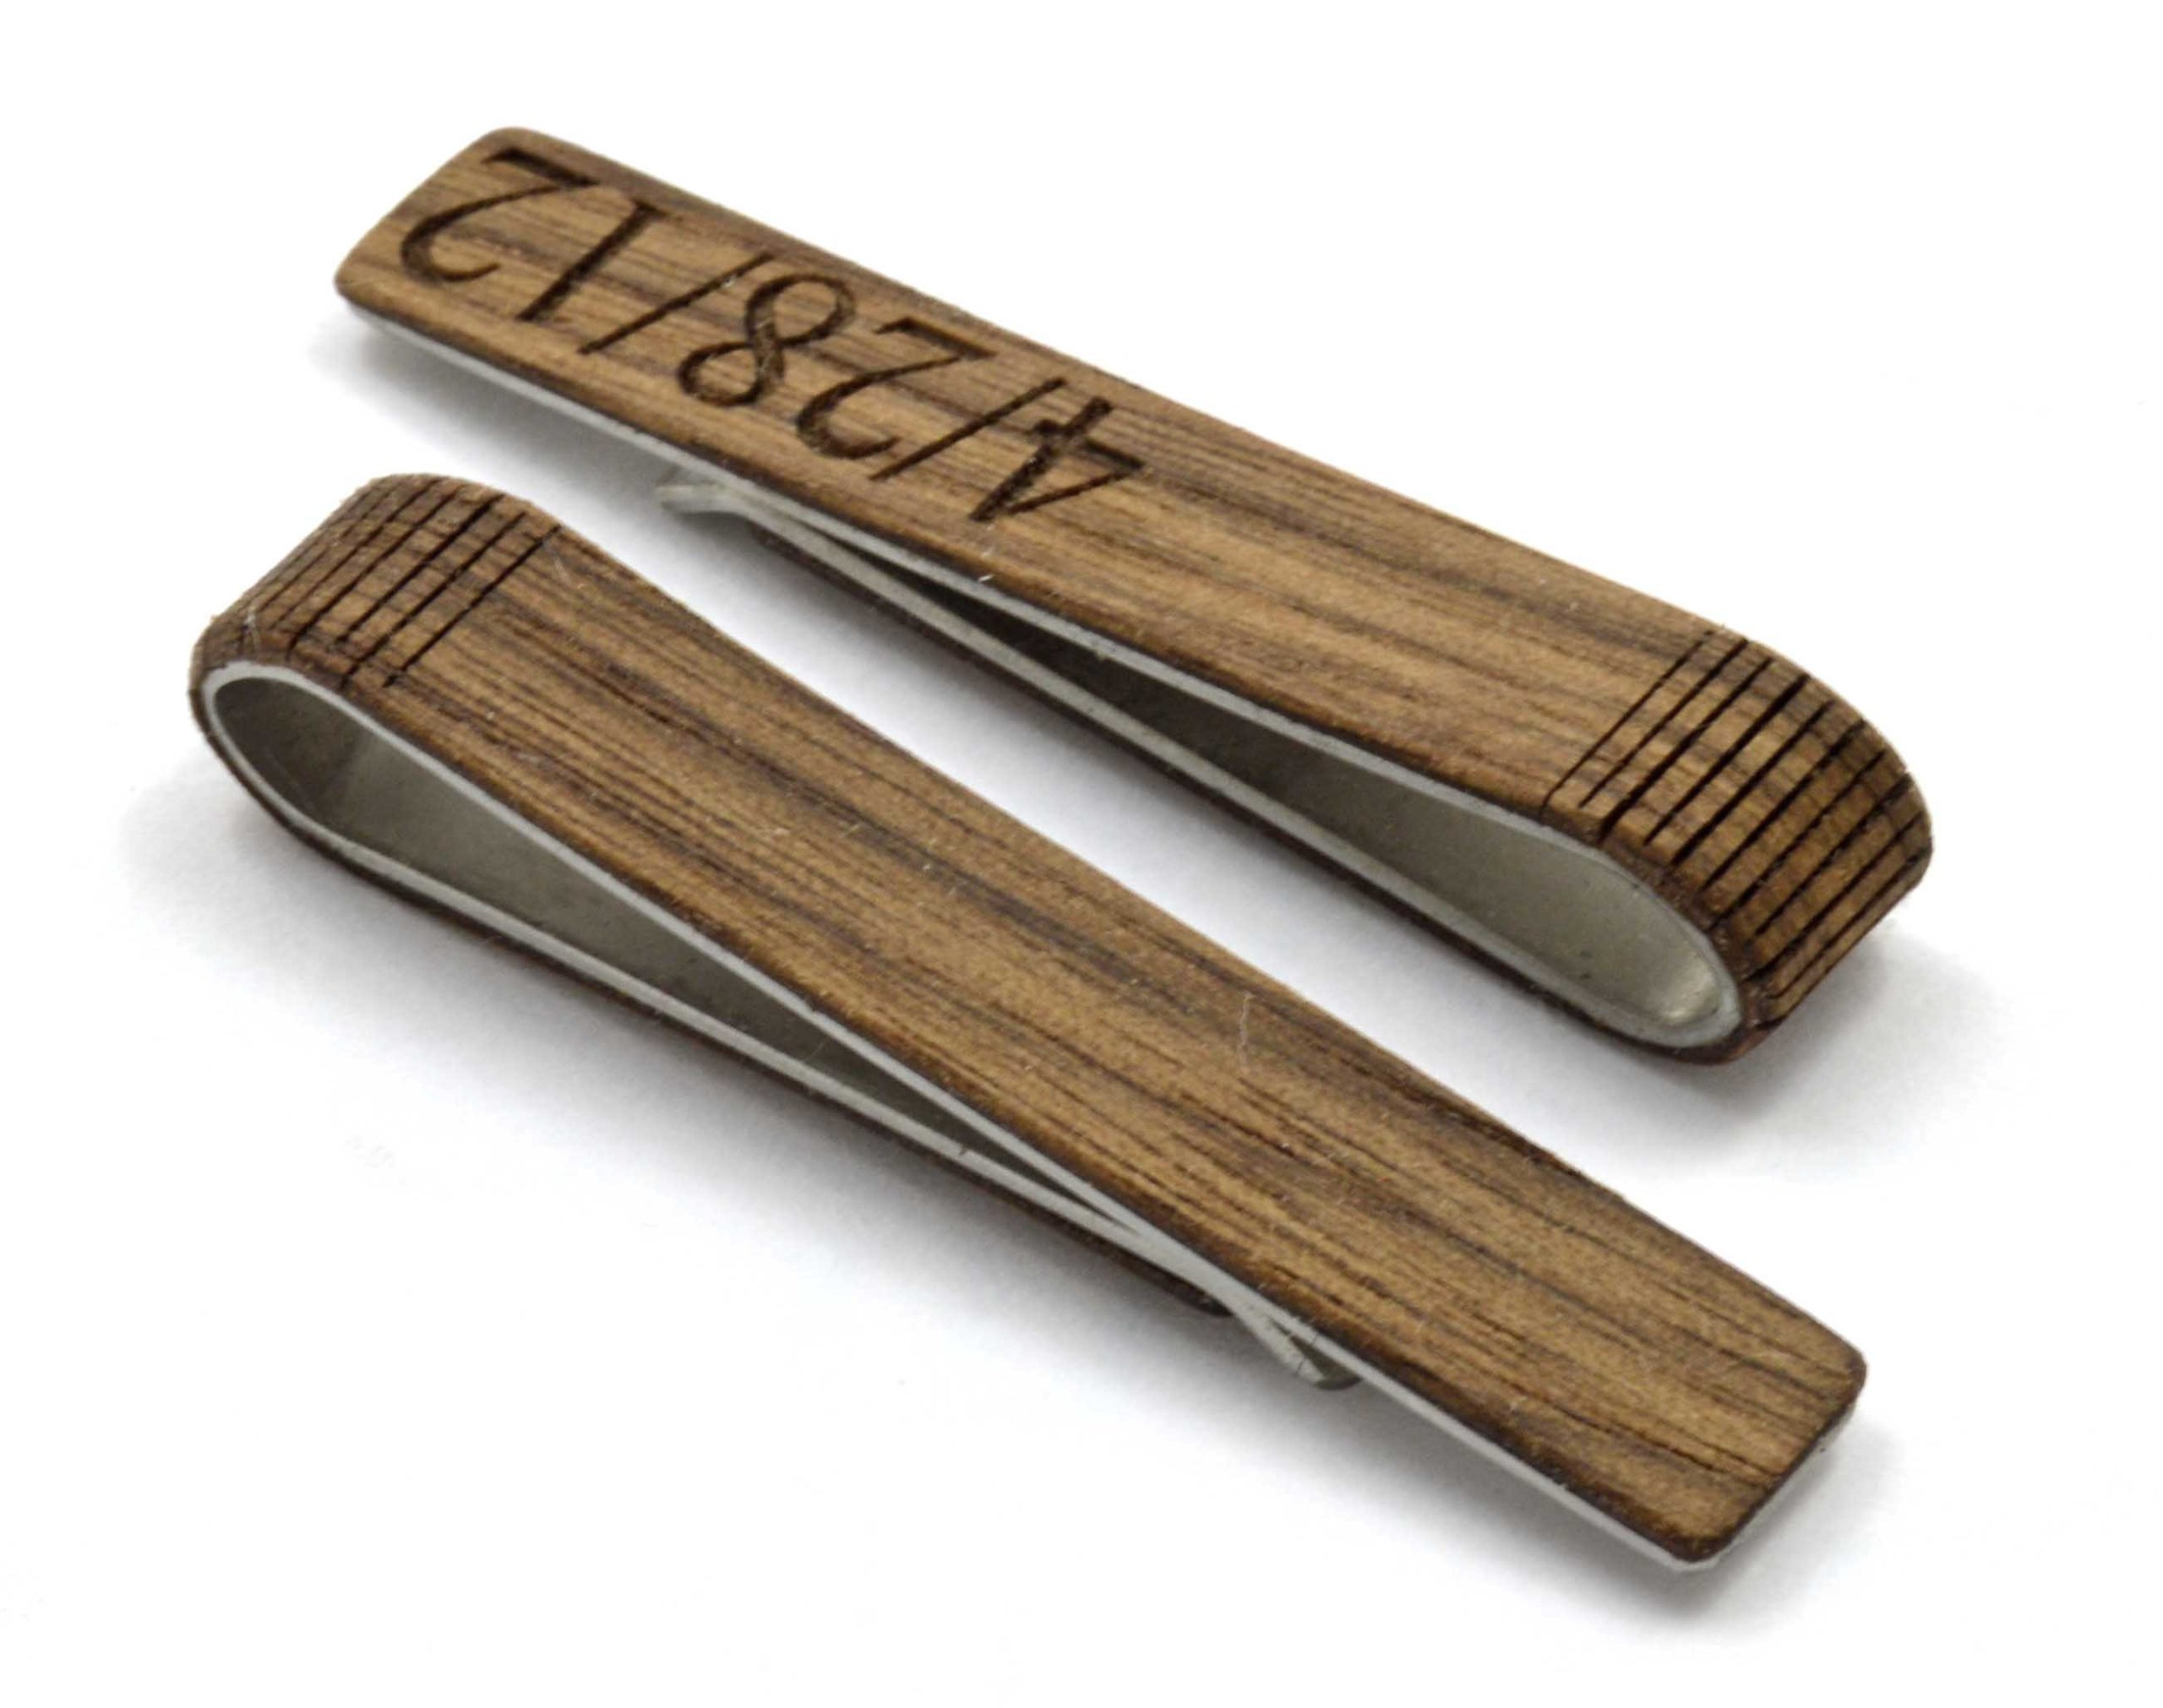 Cherry Wood Tie Bar Engraved in The USA Wooden Accessories Company Wooden Tie Clips with Laser Engraved 9Mm Bullet Design